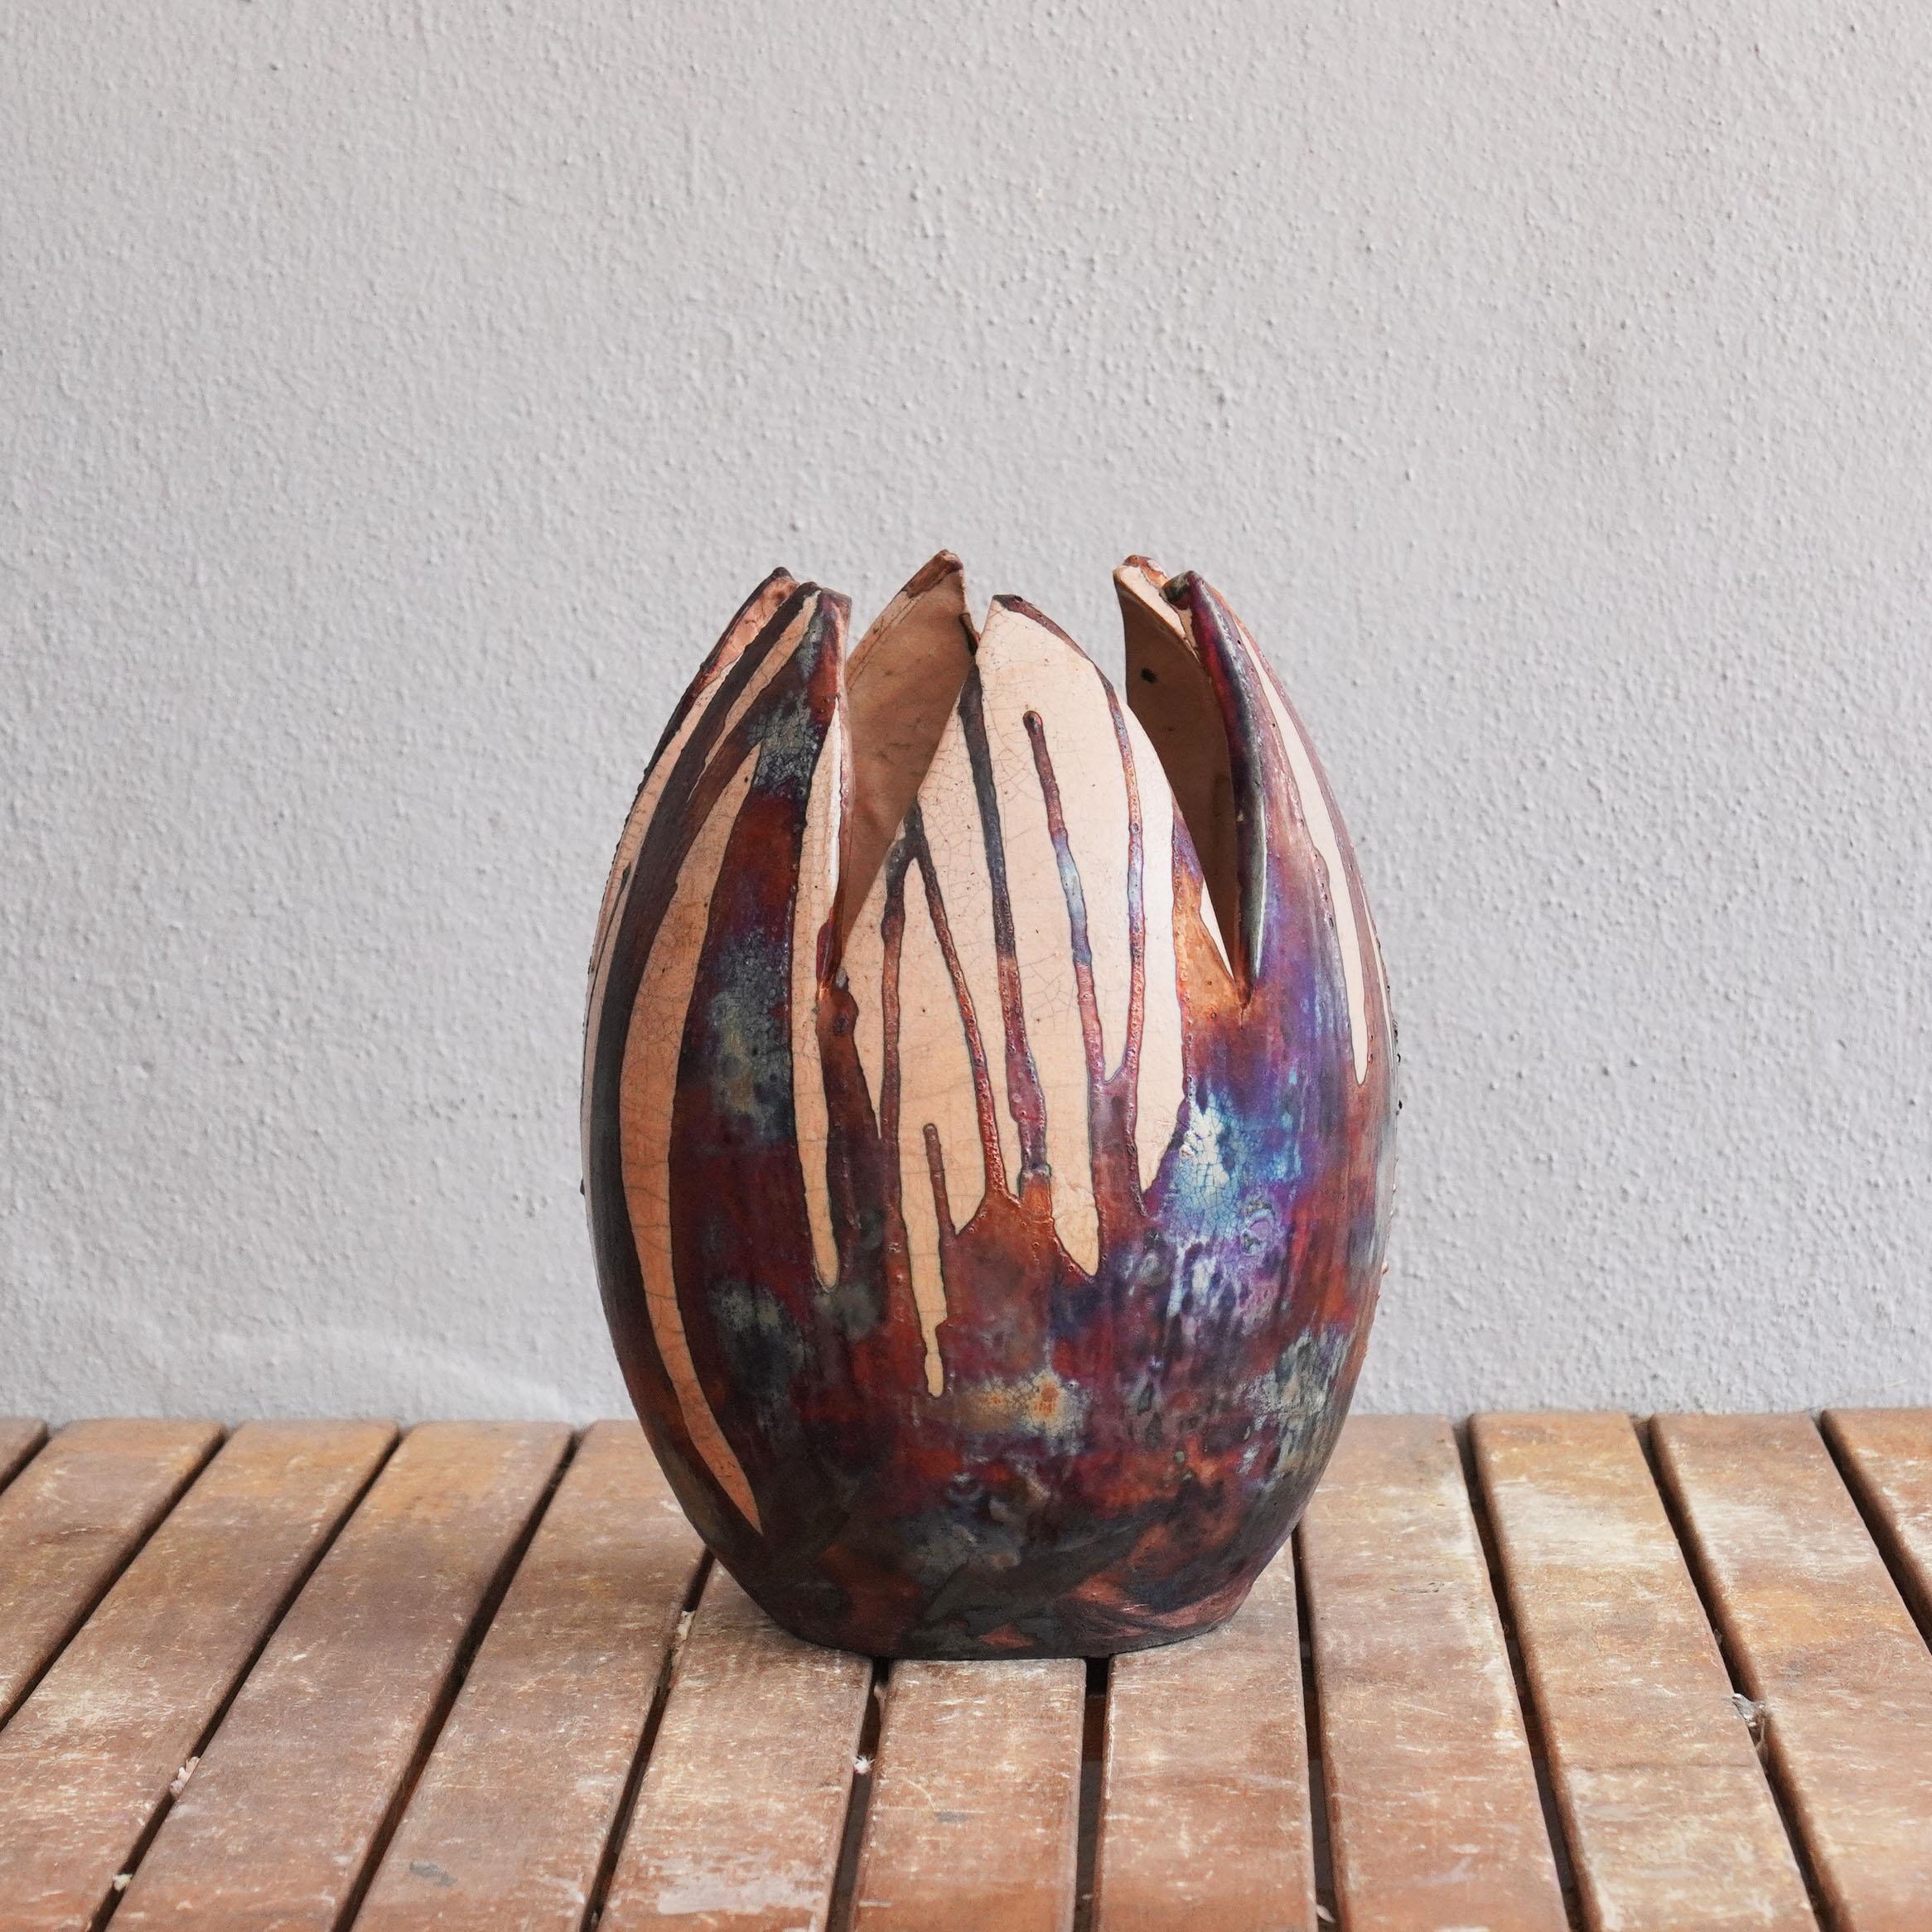 With a shape inspired from the tulip flower, the RAAQUU Flower Vase expresses a wonderful rainbow sheen on a 6 half petal top oval shaped vase. This vase requires precise forming and is my most complicated shape so far.

The final vase will be of